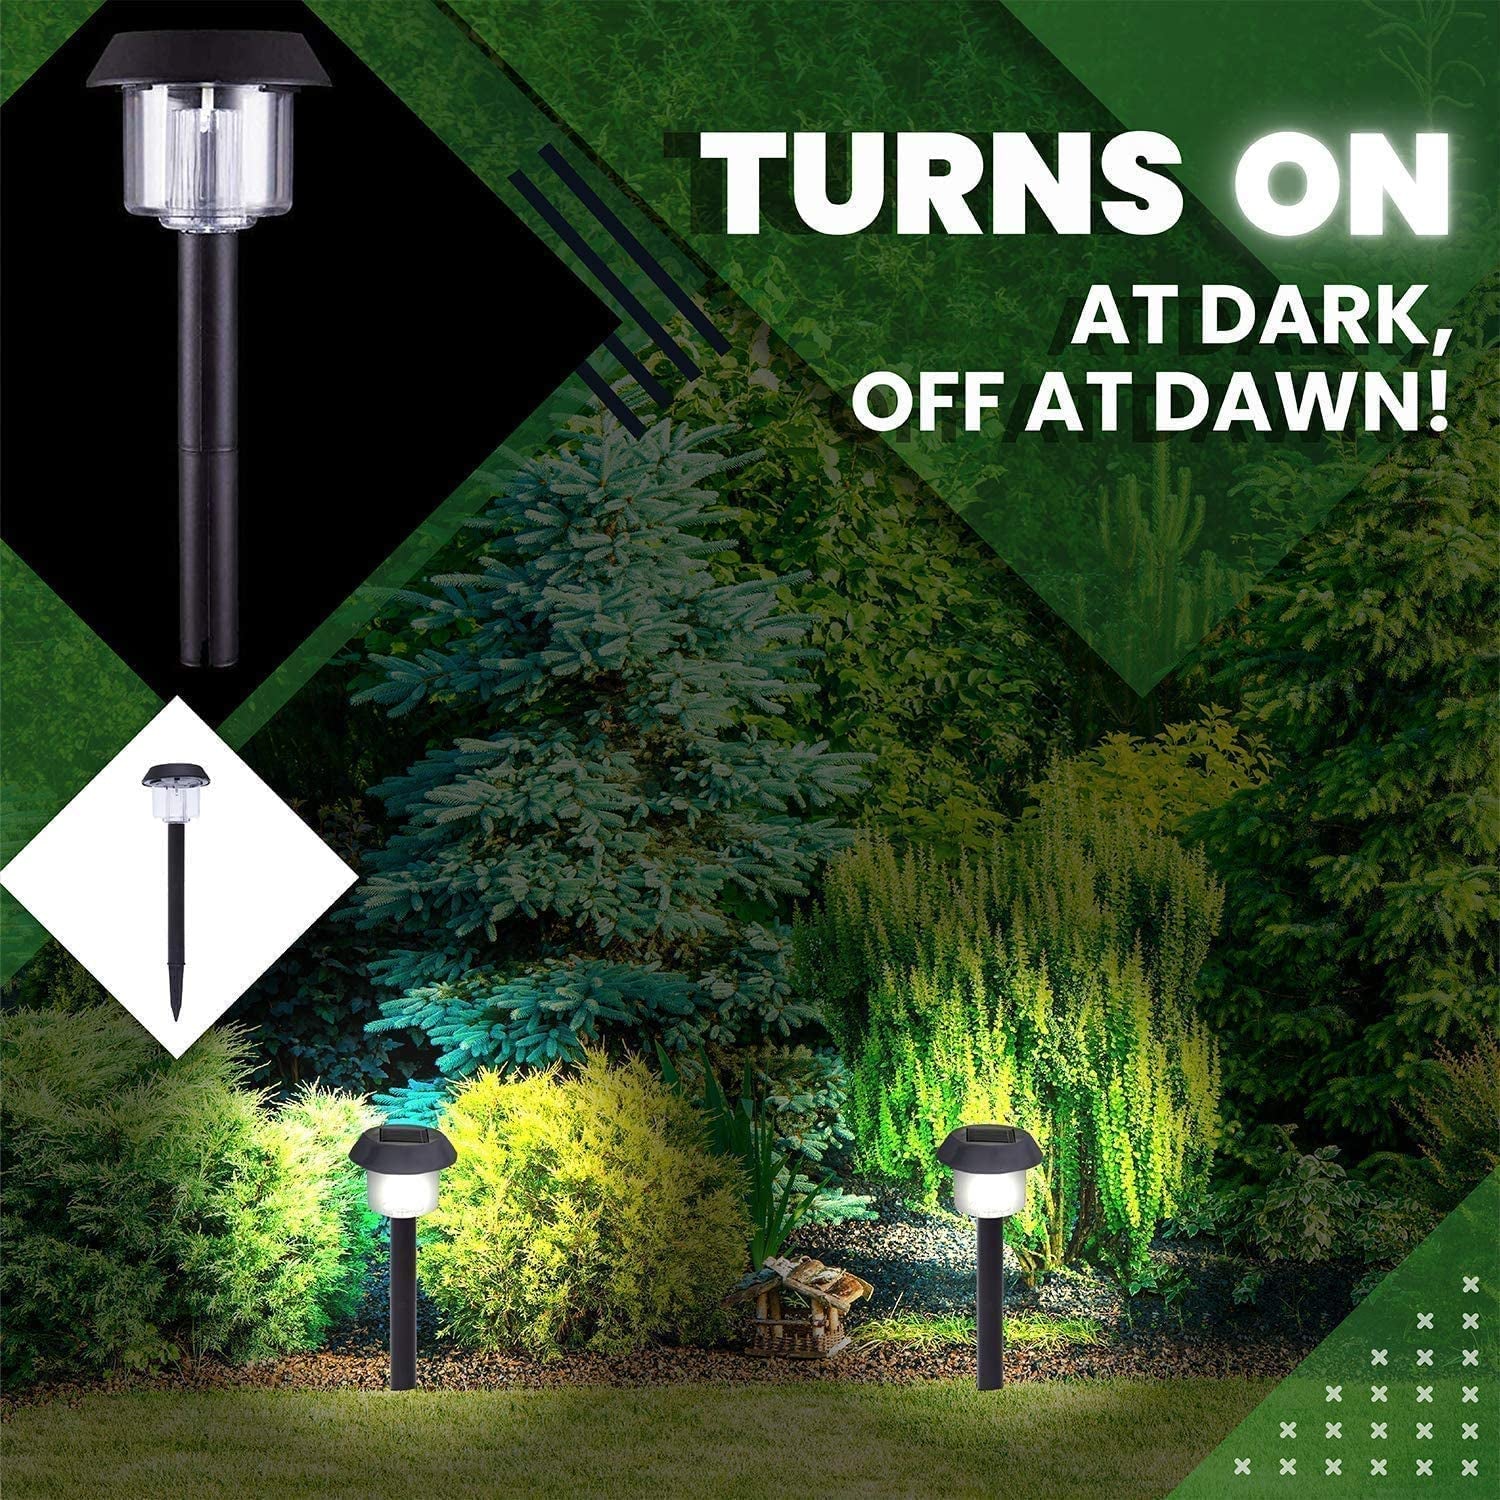 Solar Garden Lights - Auto On/Off Outdoor Bright Solar Pathway Lights - All-Weather/Waterproof Outdoor Solar Lights for Yard, Garden, or Driveway (8-Pack, Black)